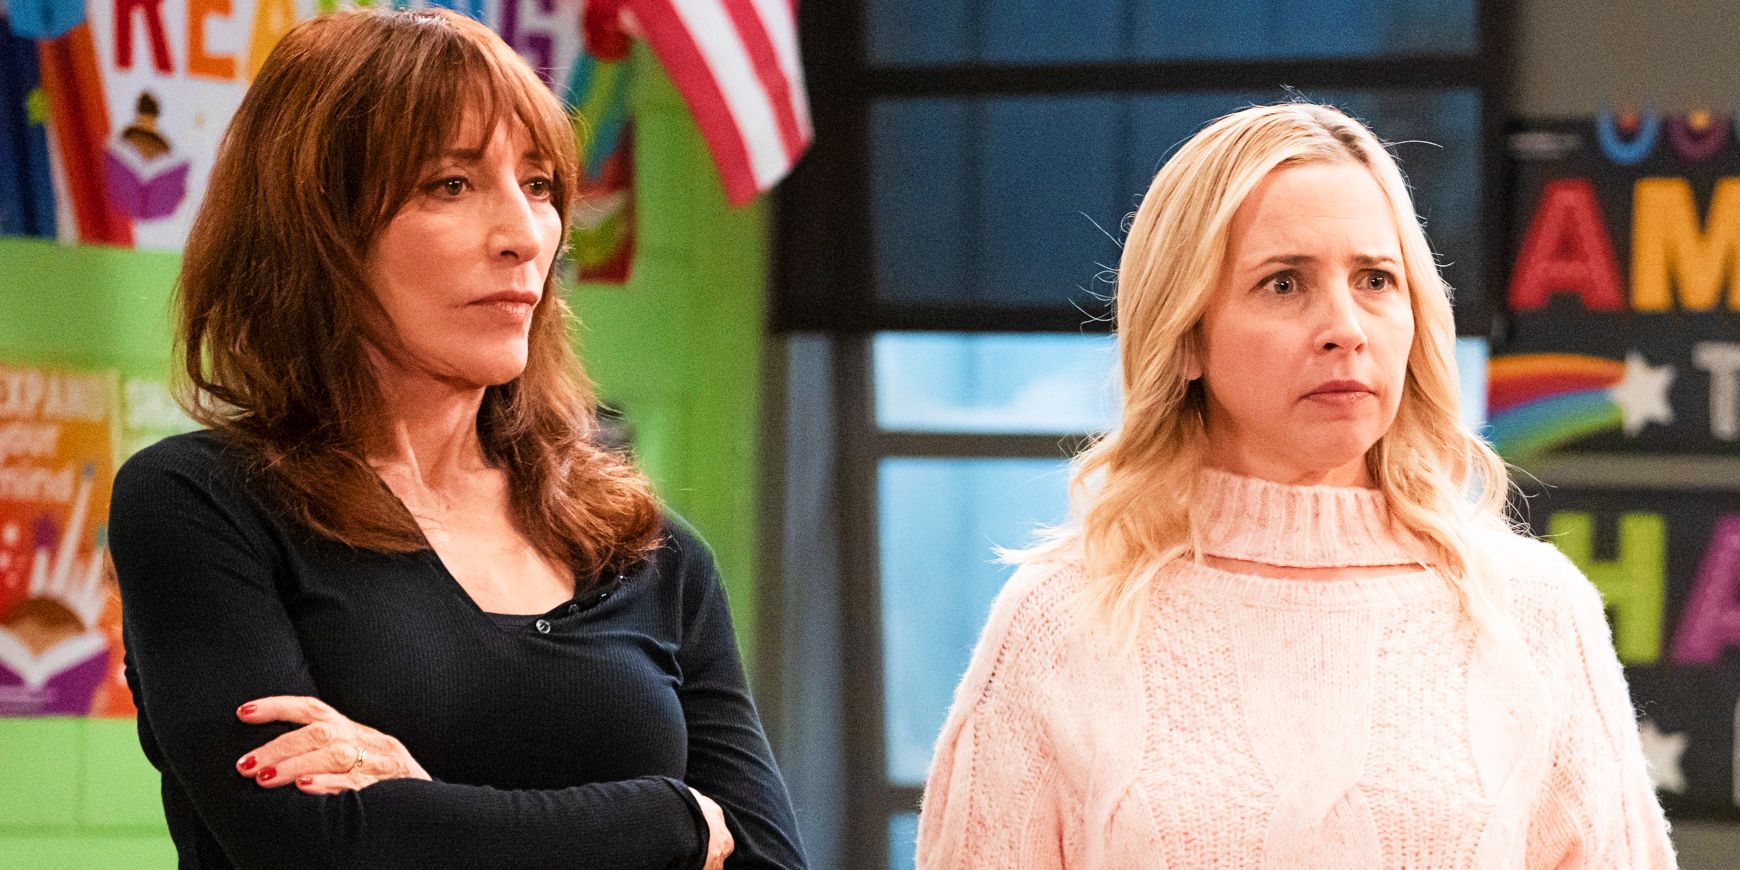 Katey Segal as Louise and Lecy Goranson as Becky standing in a classroom looking concerned in The Conners season 6 episode 4